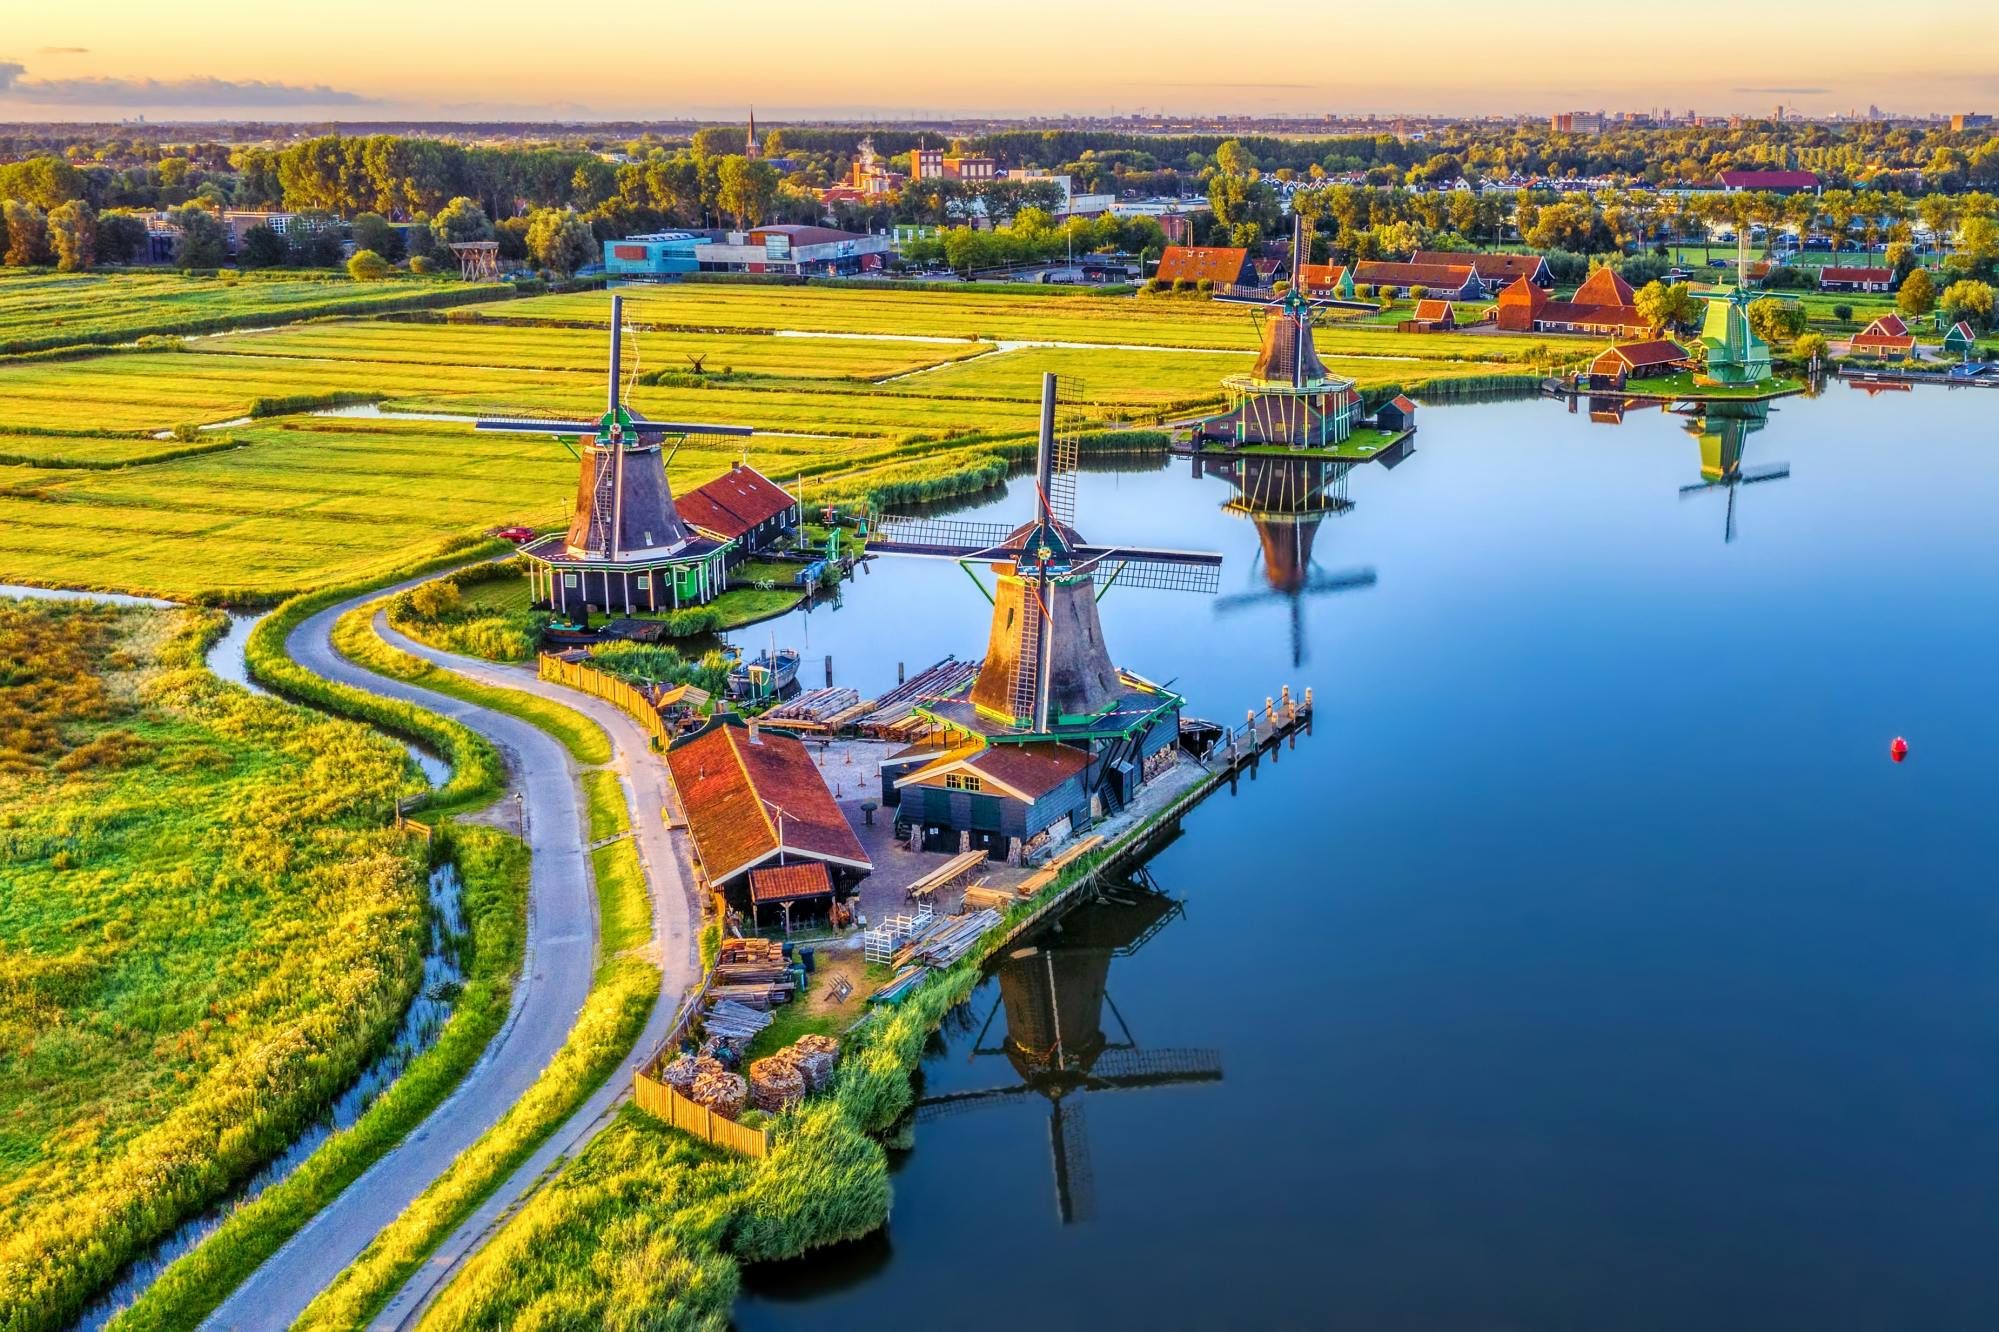 Half-Day Trip to Zaanse Schans and Self-Guided Walking Tour